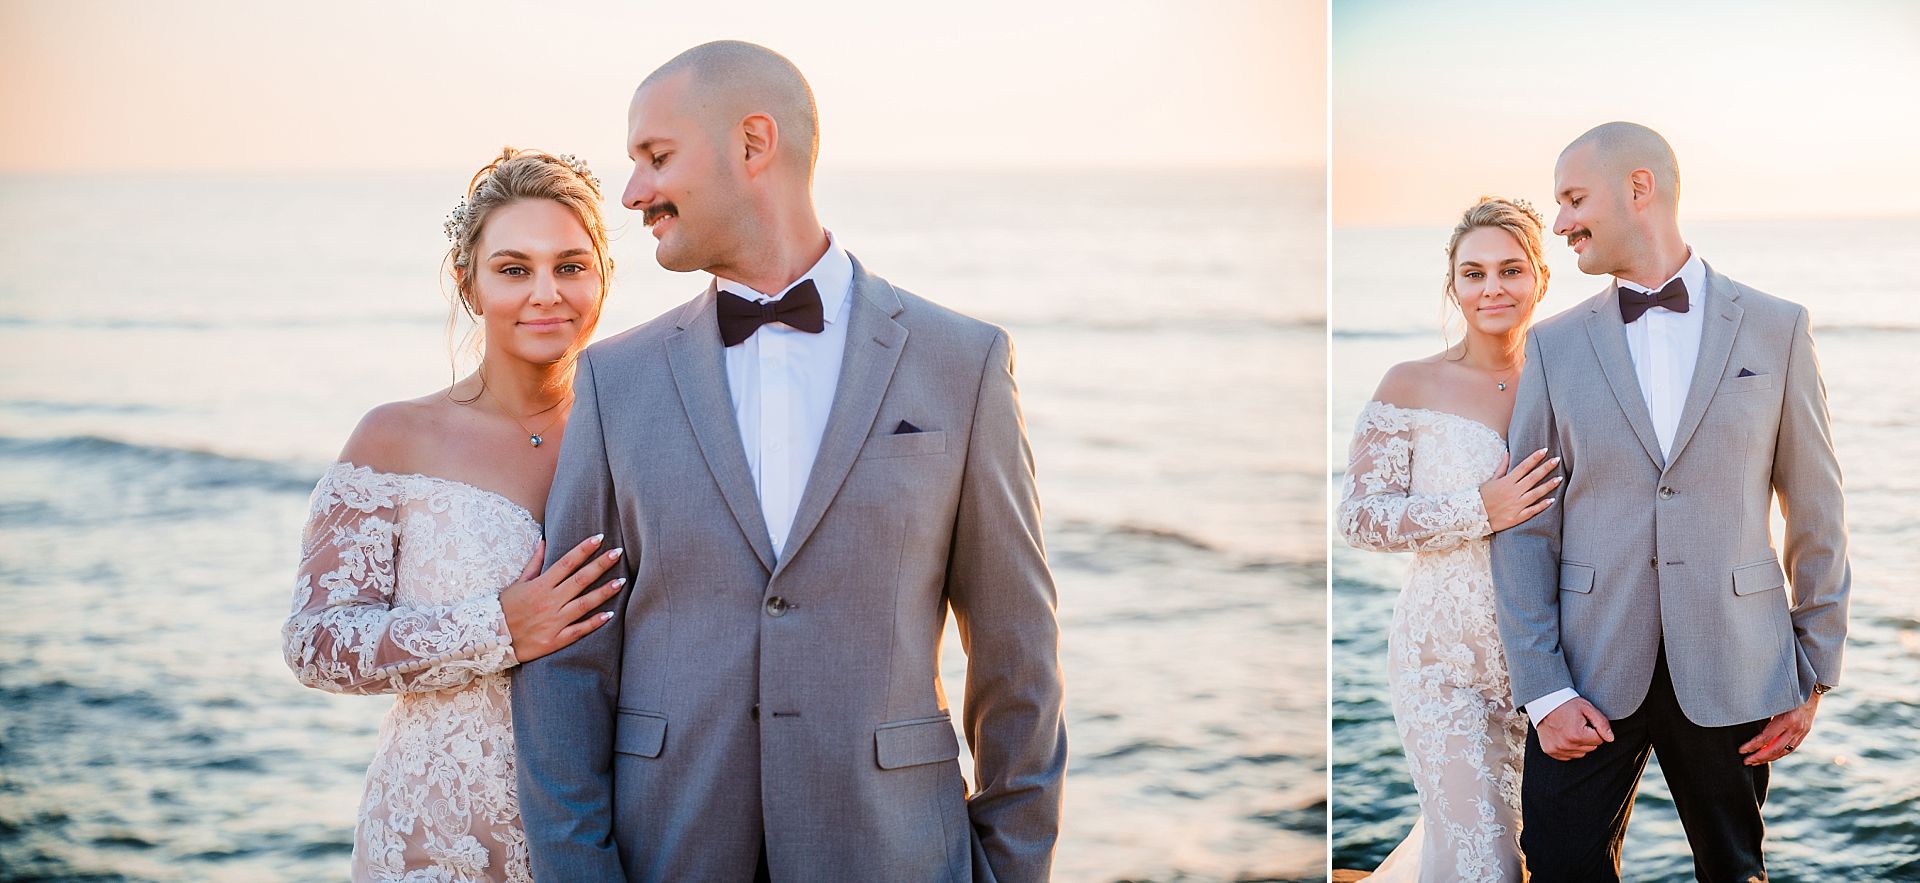 Grooms smiles over at bride at San Diego beach wedding